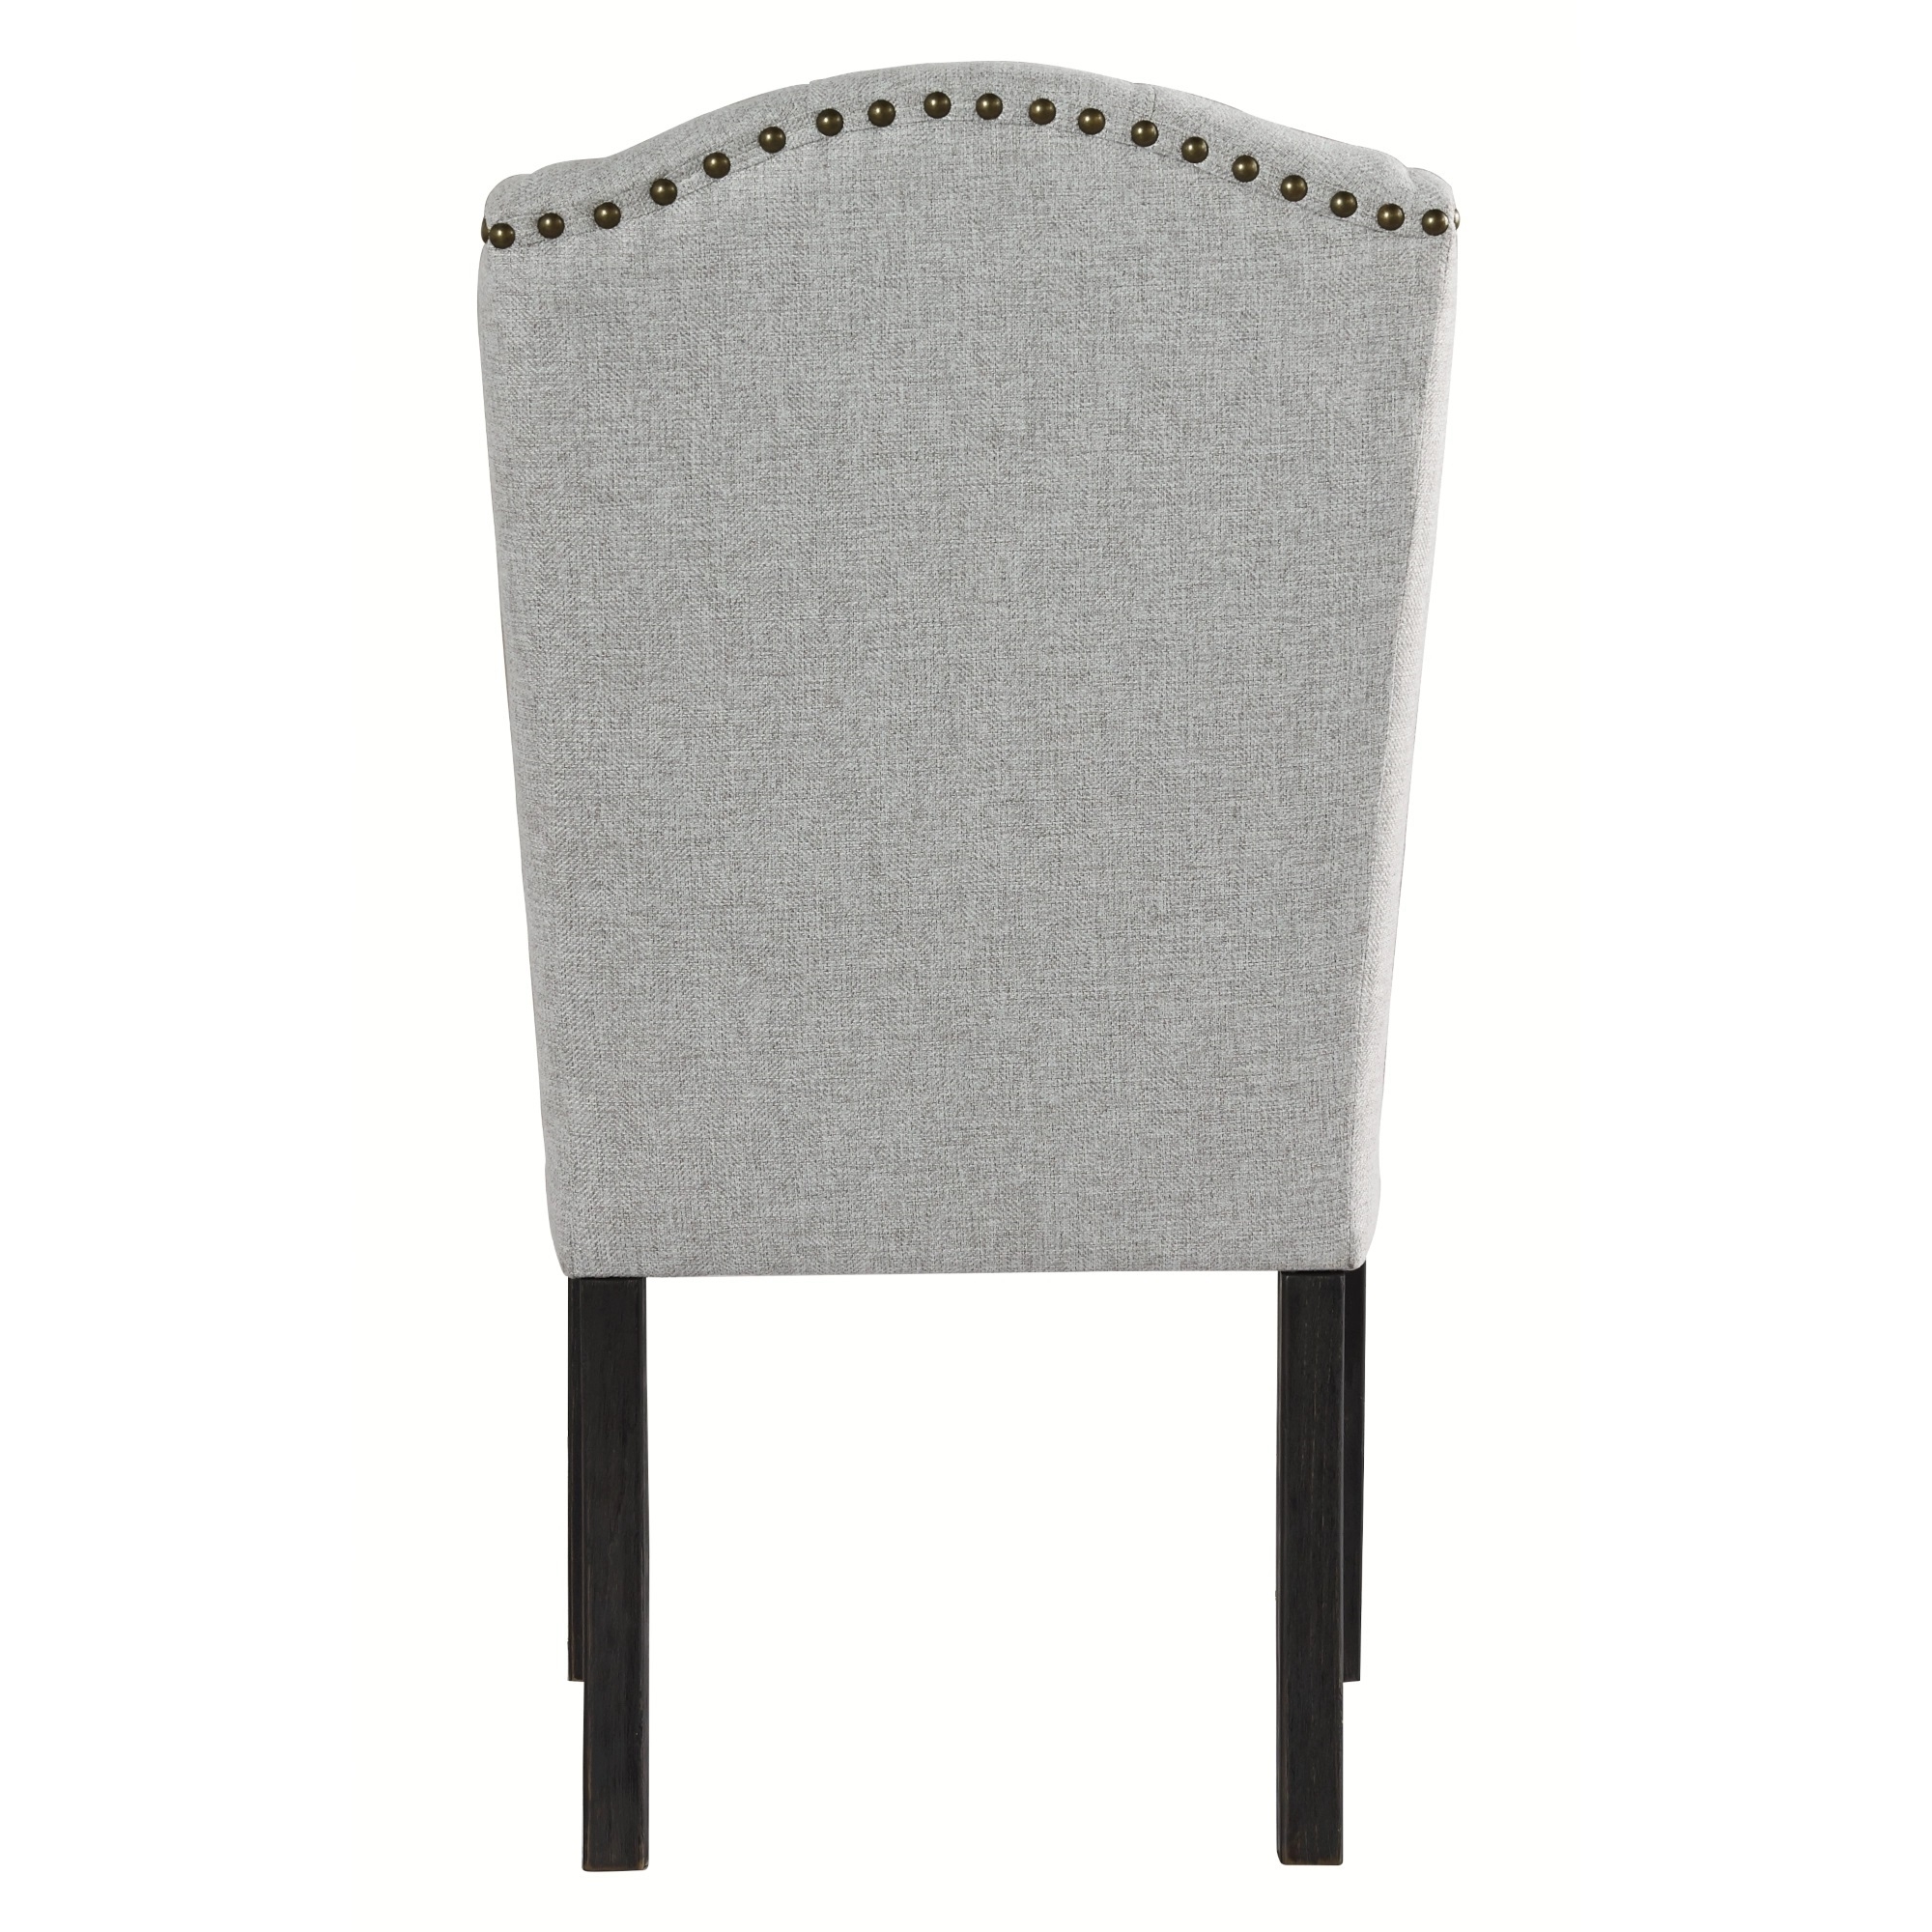 Button Tufted Fabric Upholstered Side Chair With Wooden Legs,Set Of 2, Gray- Saltoro Sherpi